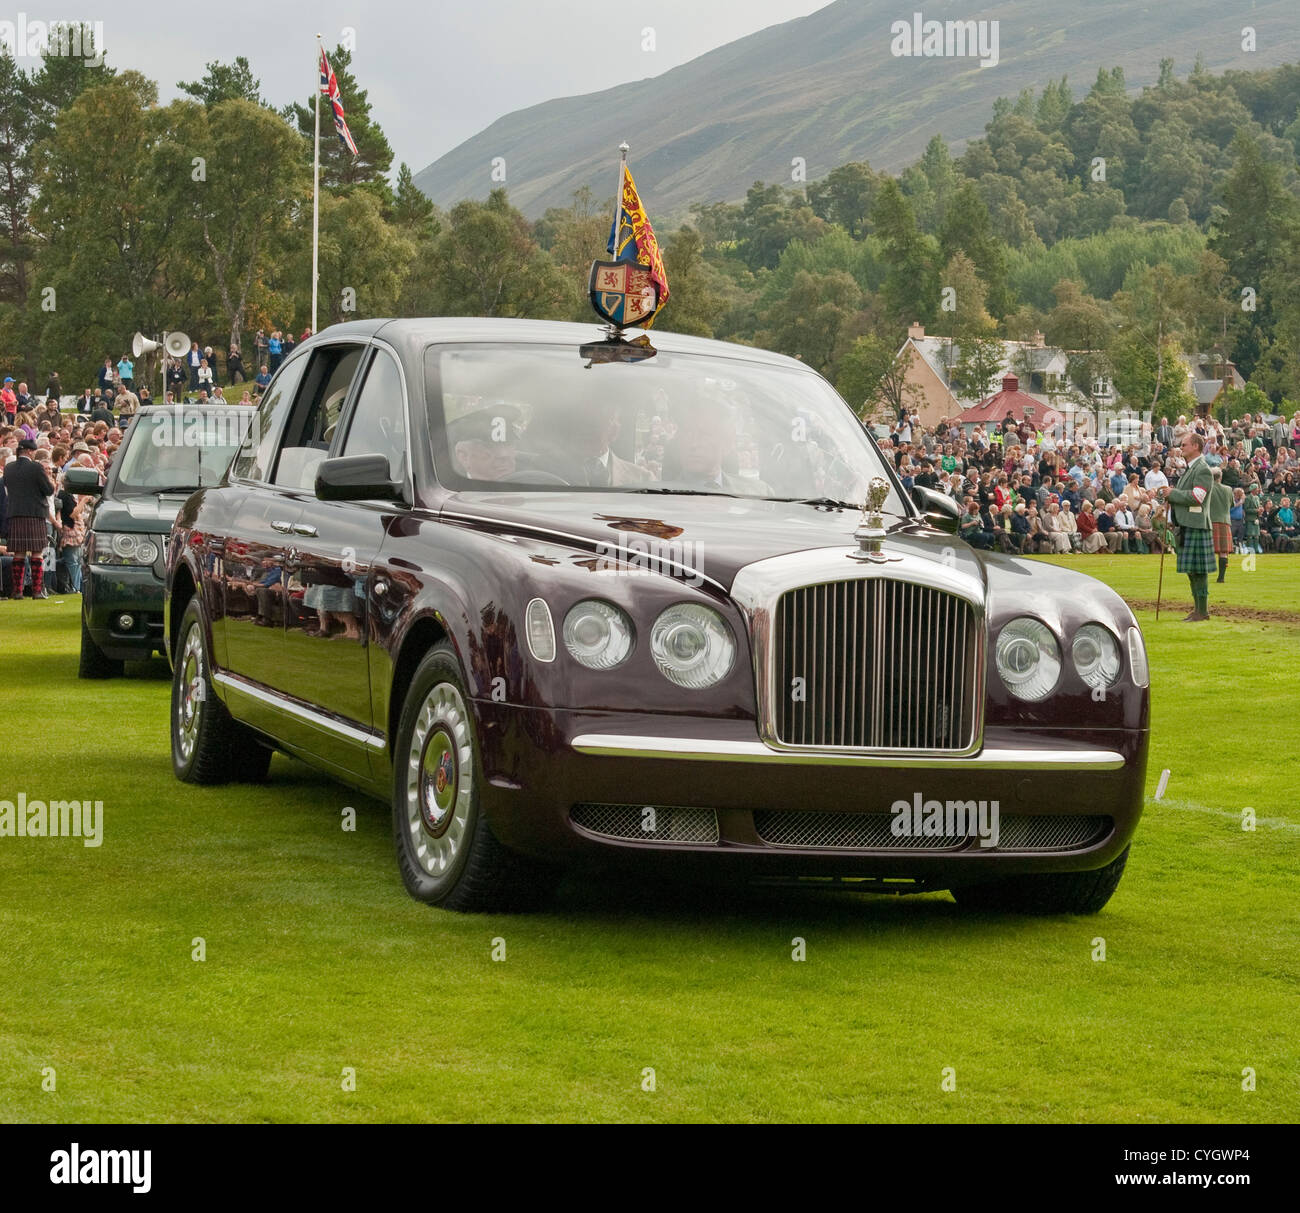 Royal Rolls Royce carrying the queen at the 'Braemar Gathering' Highland games, Highlands, Scotland Stock Photo